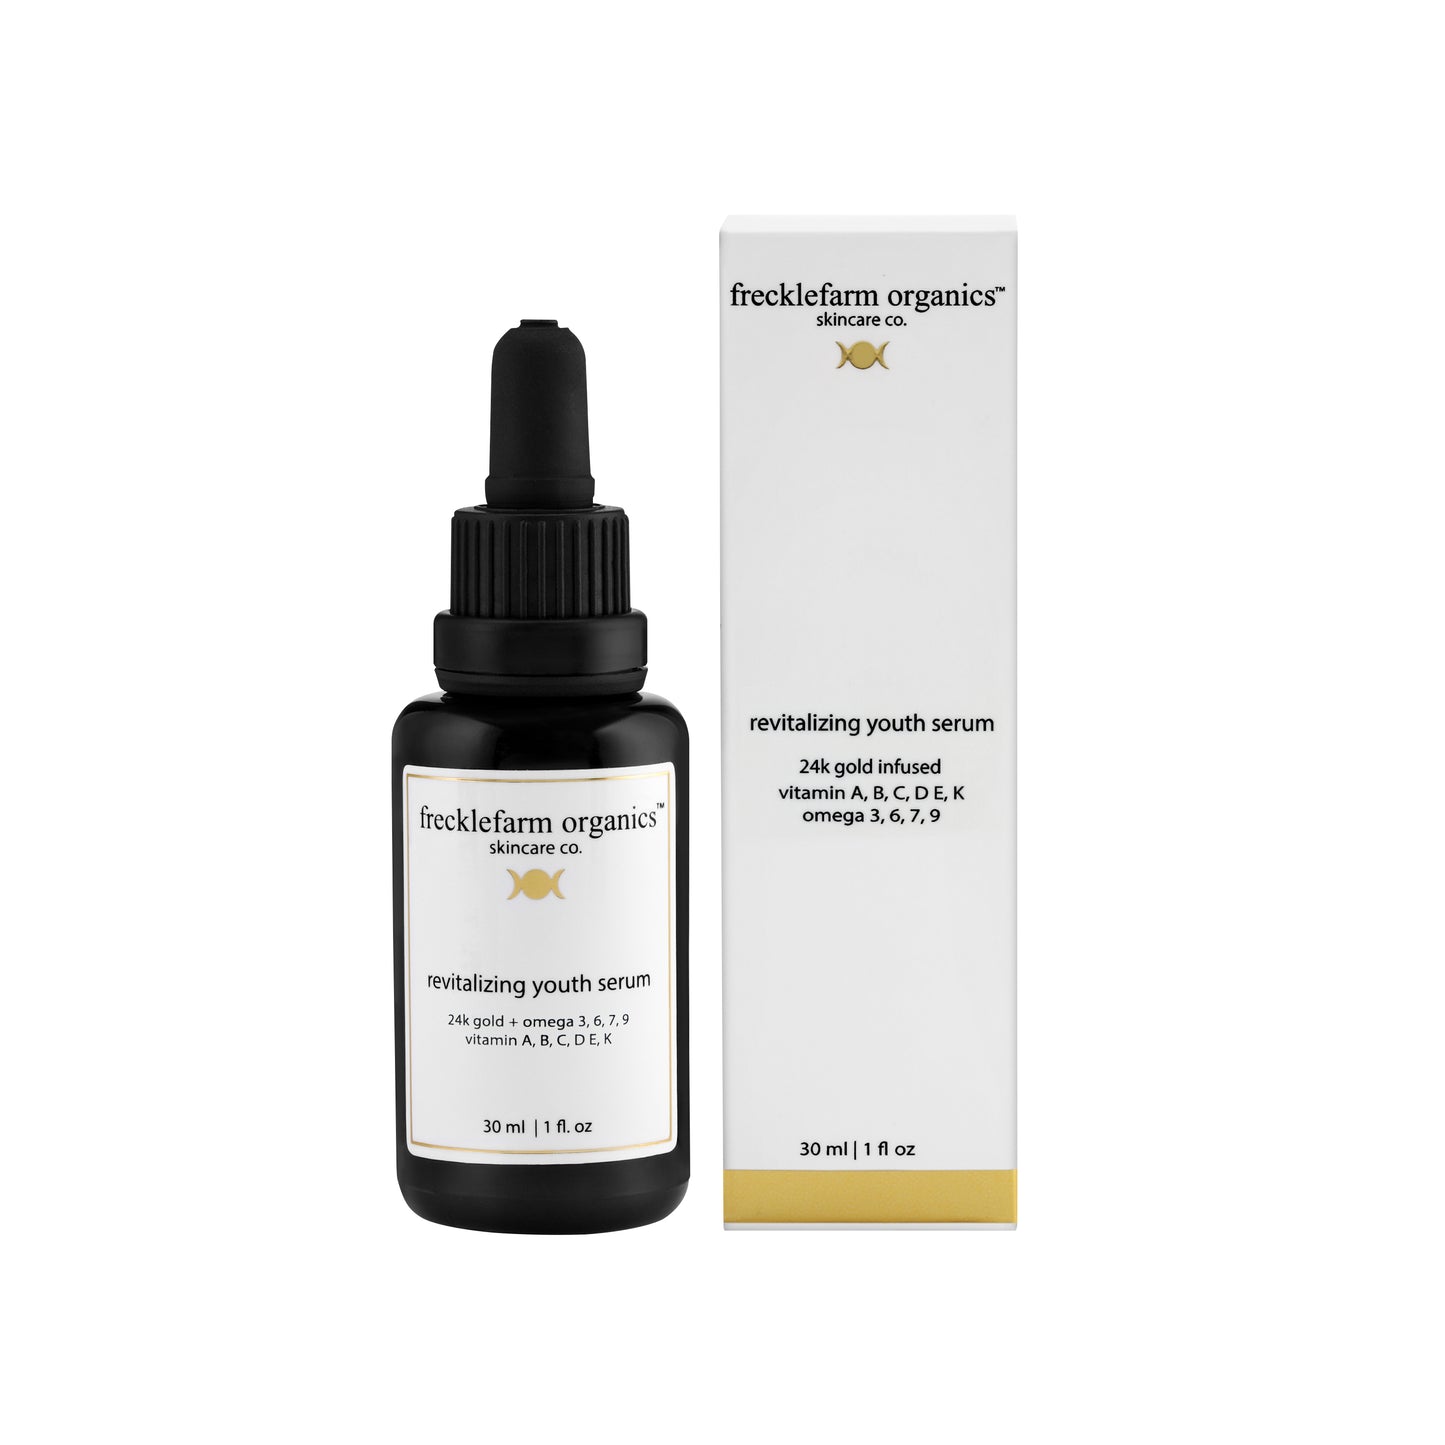 24k gold infused revitalizing youth serum